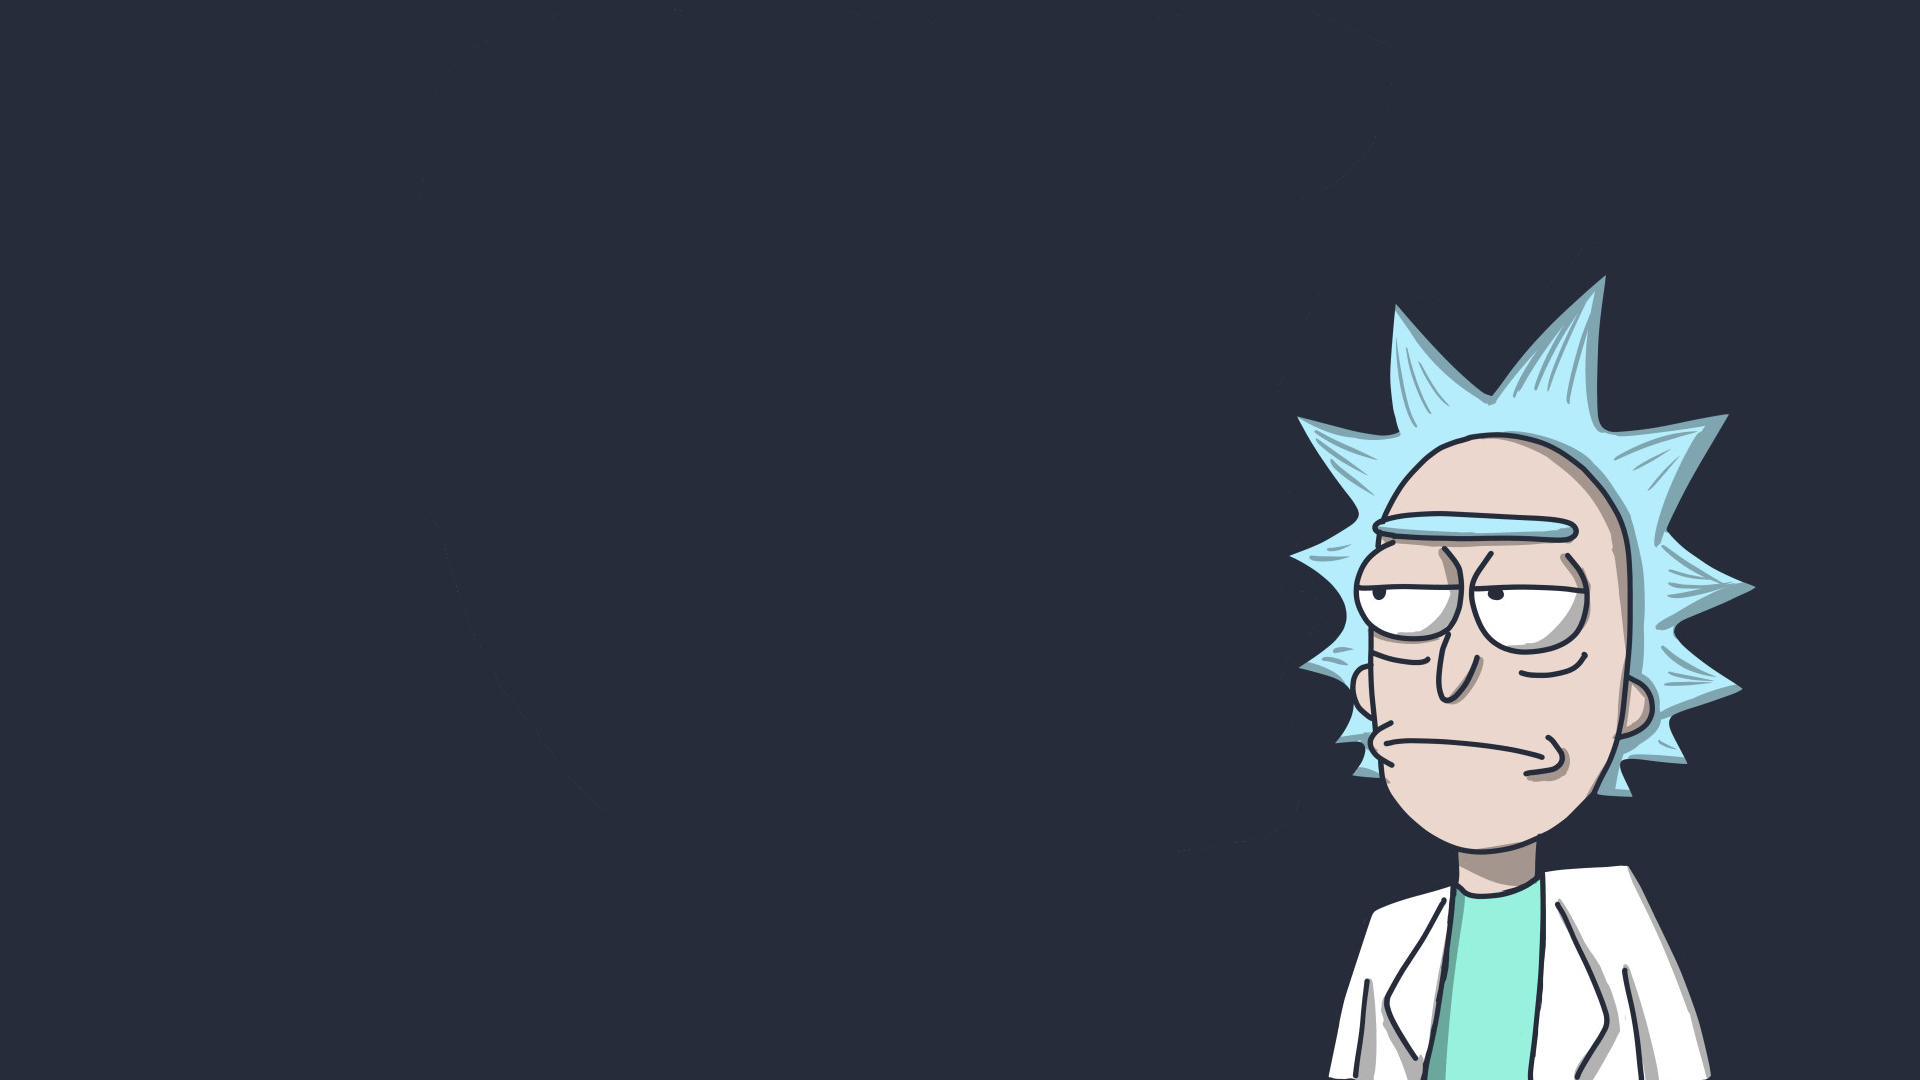 Anatomy Park Rick And Morty Wallpapers